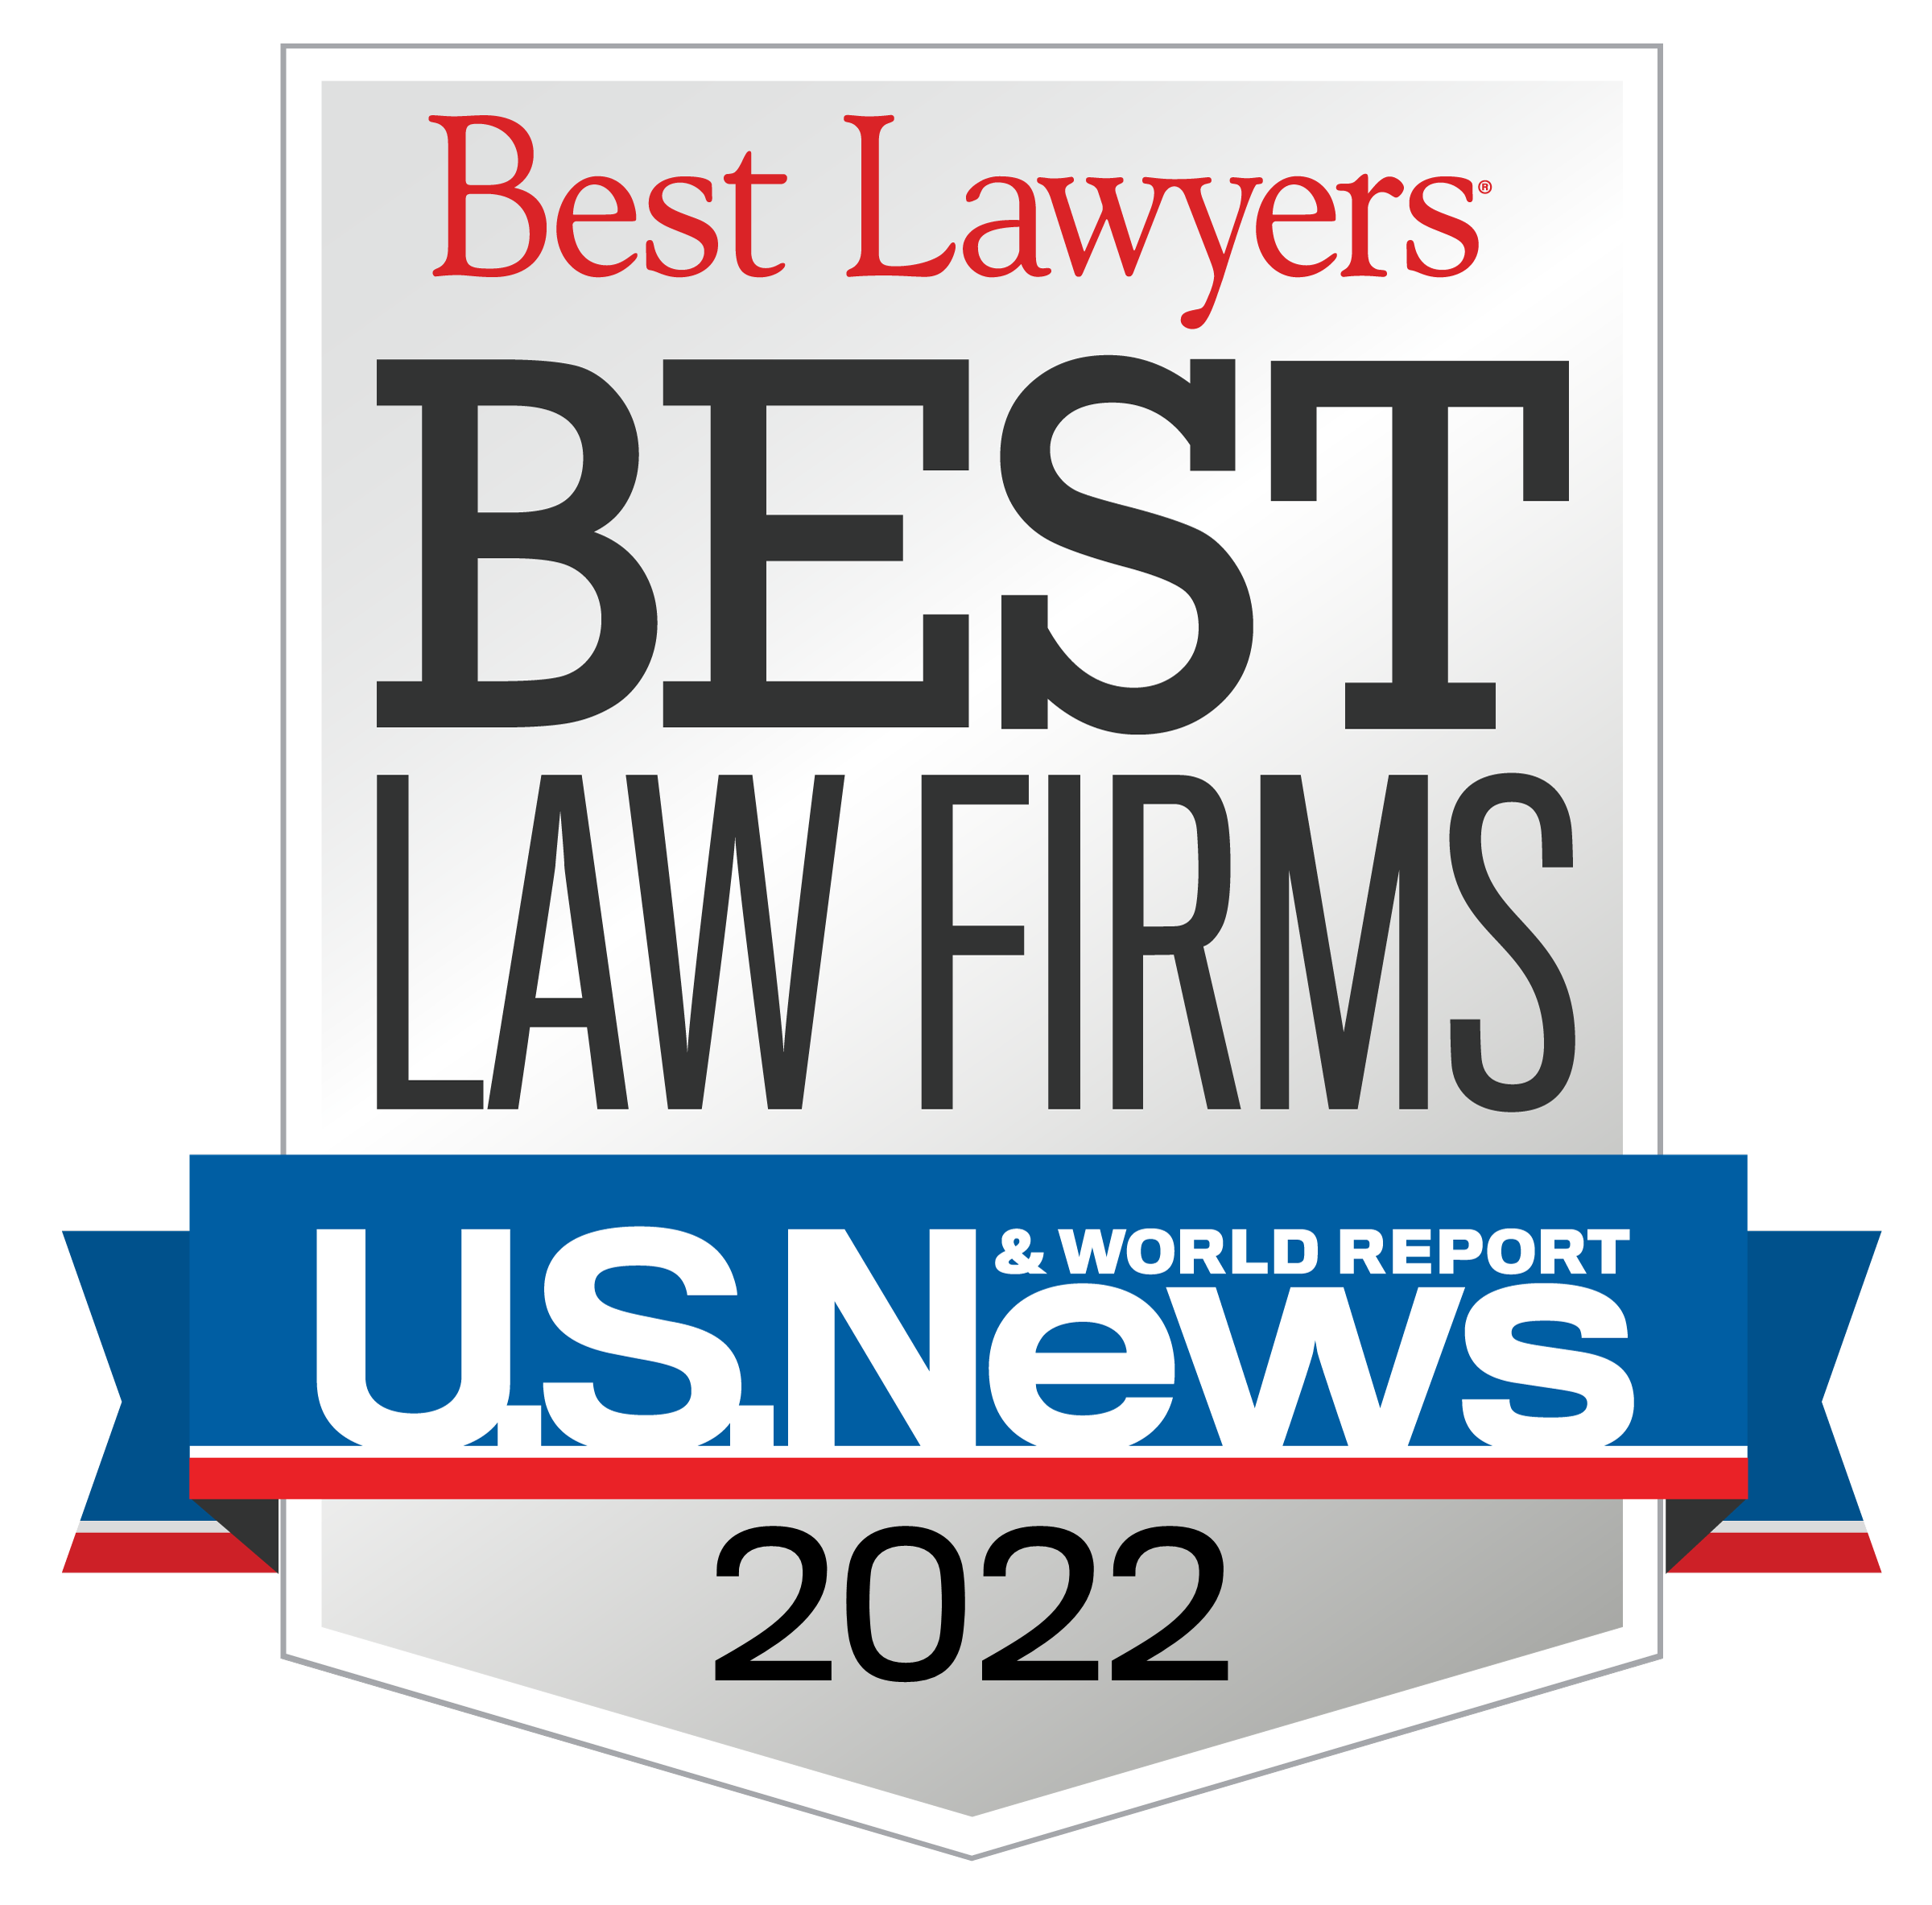 Best Law Firms in 2022